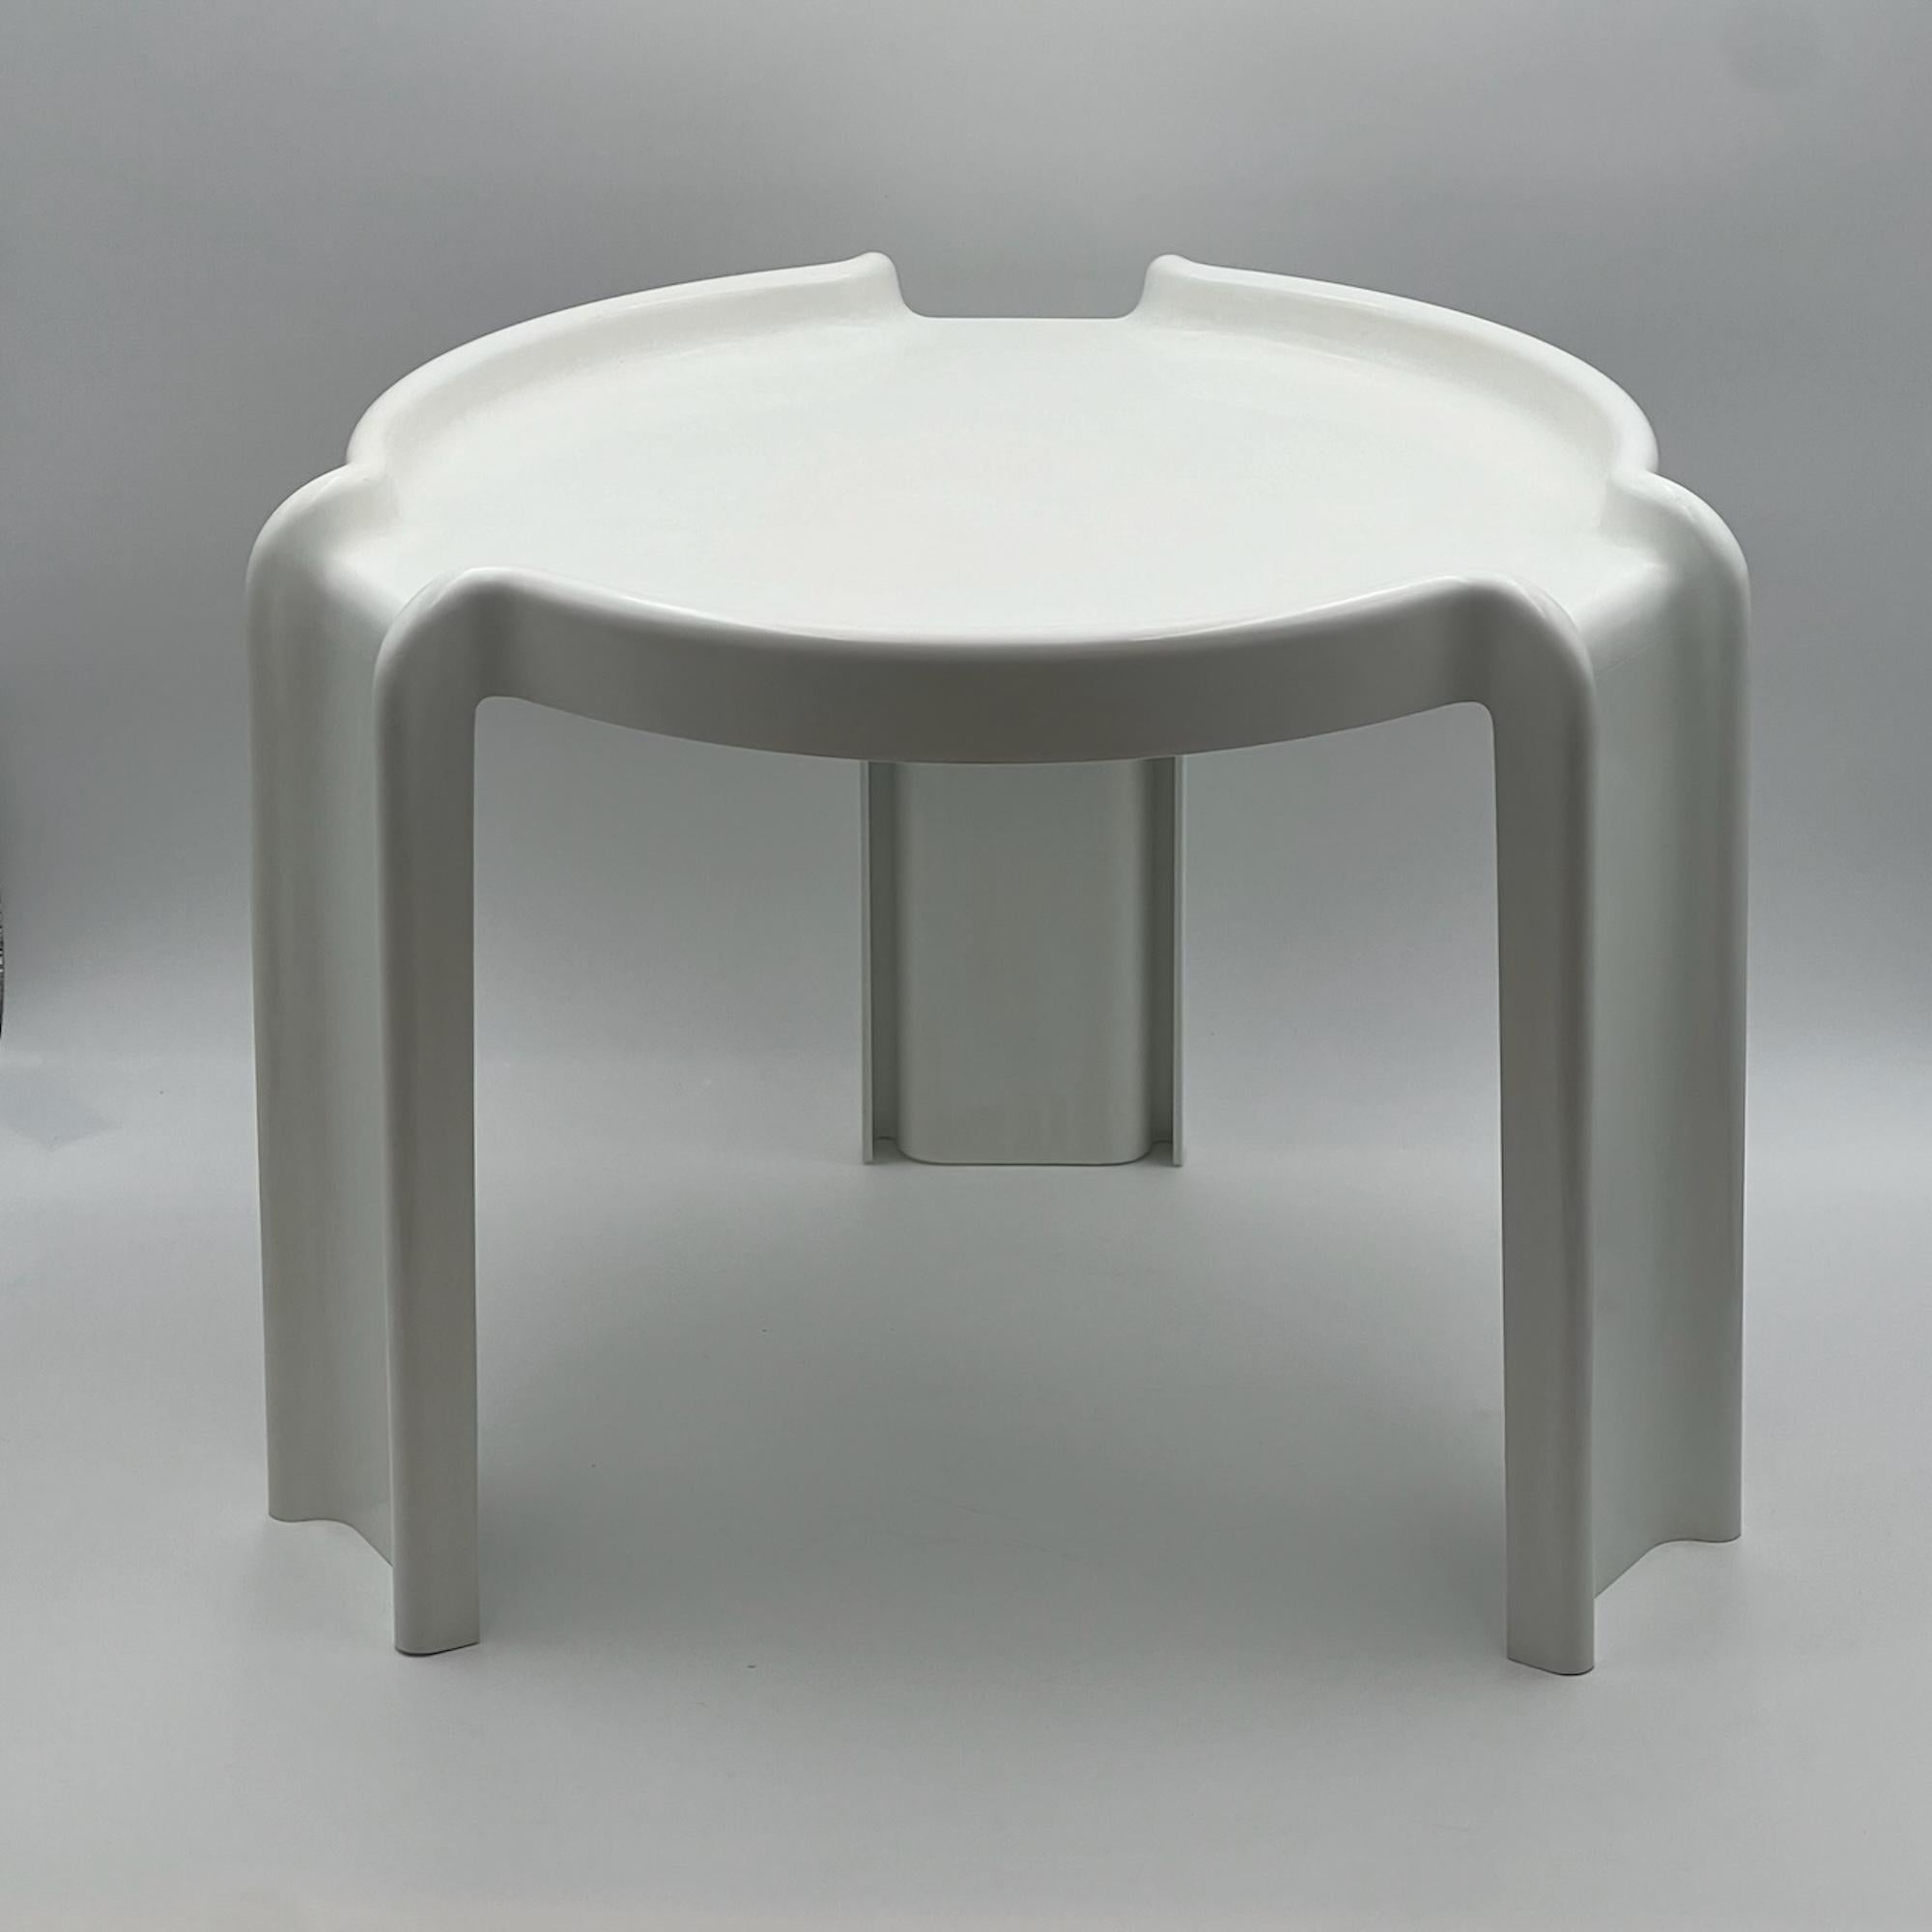 Italian Futuristic Giotto Stoppino Space Age Coffee Table for Kartell, 1960s For Sale